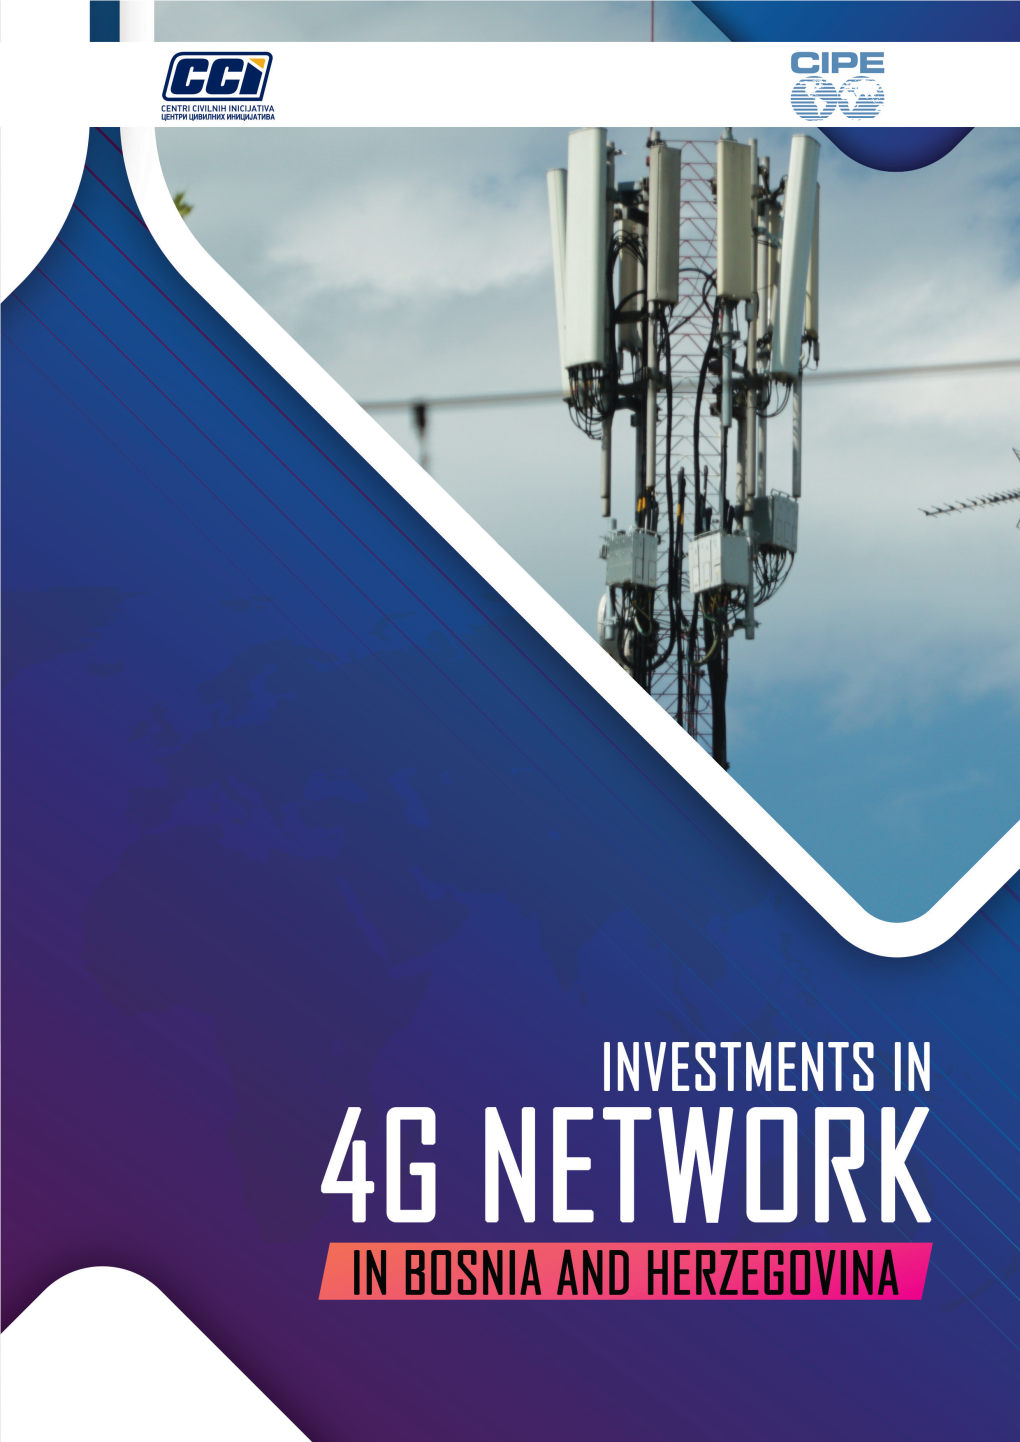 Case Study “BH Telecom Investments in 4G/4G+ Network”)